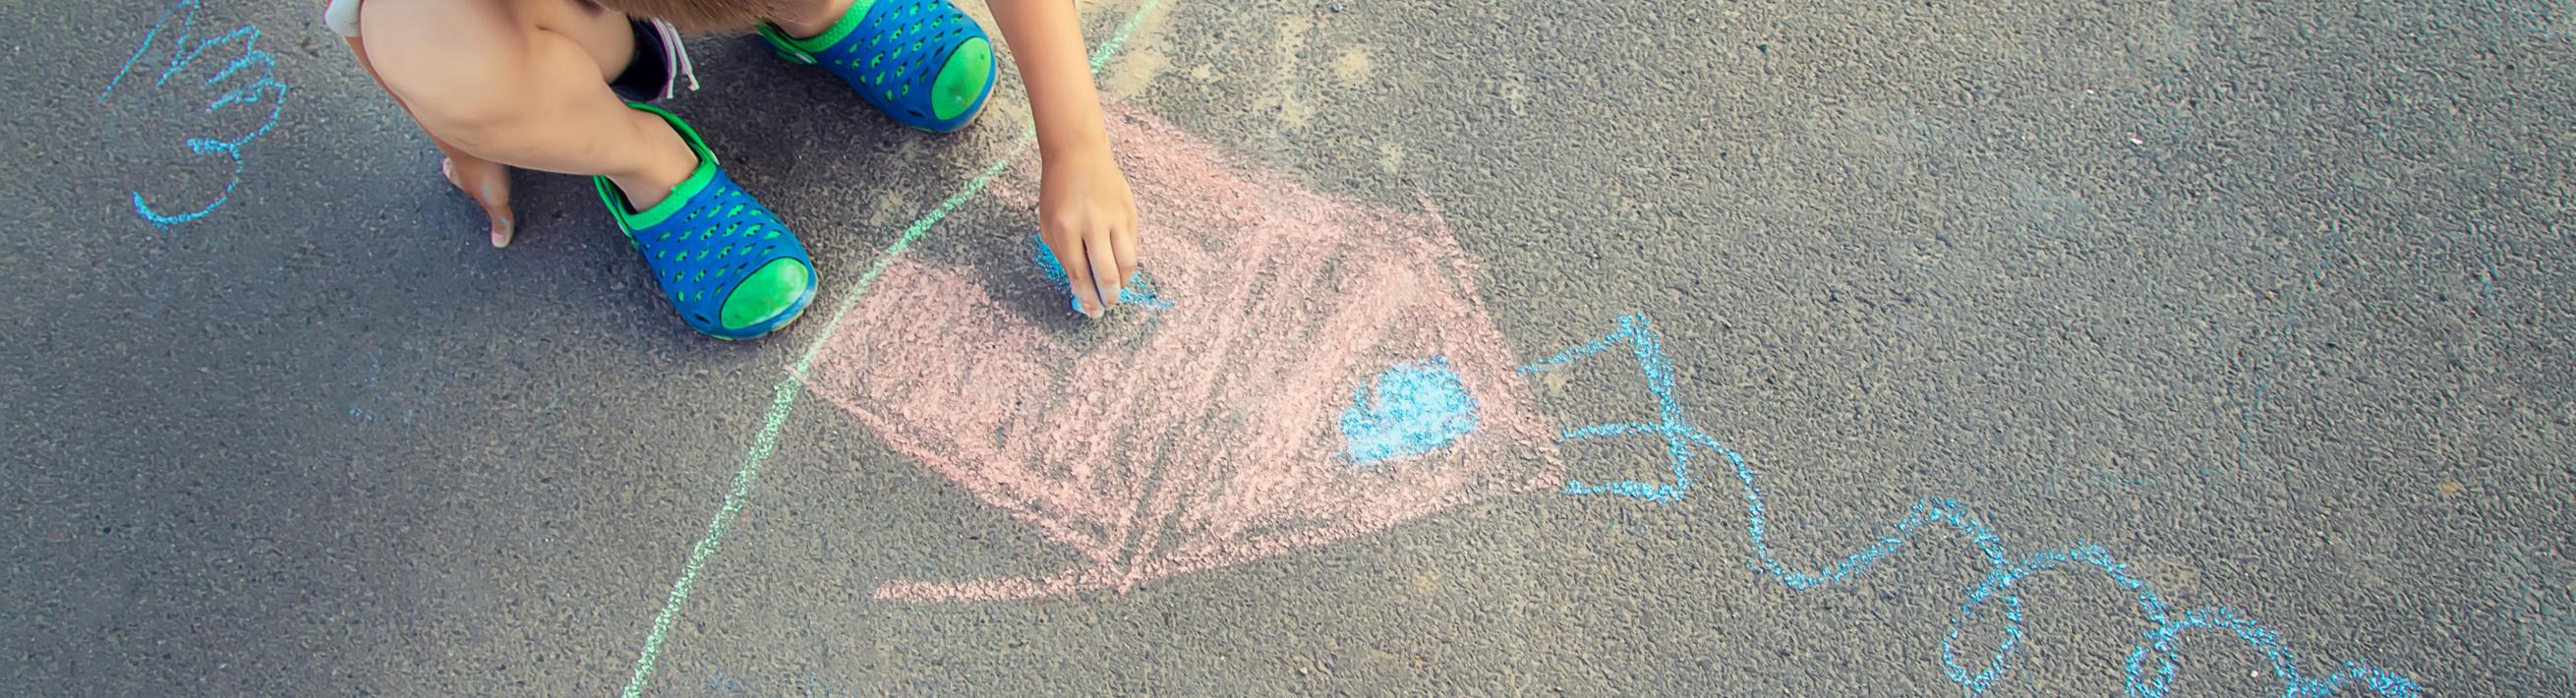 kid drawing on the sidewalk with chalk